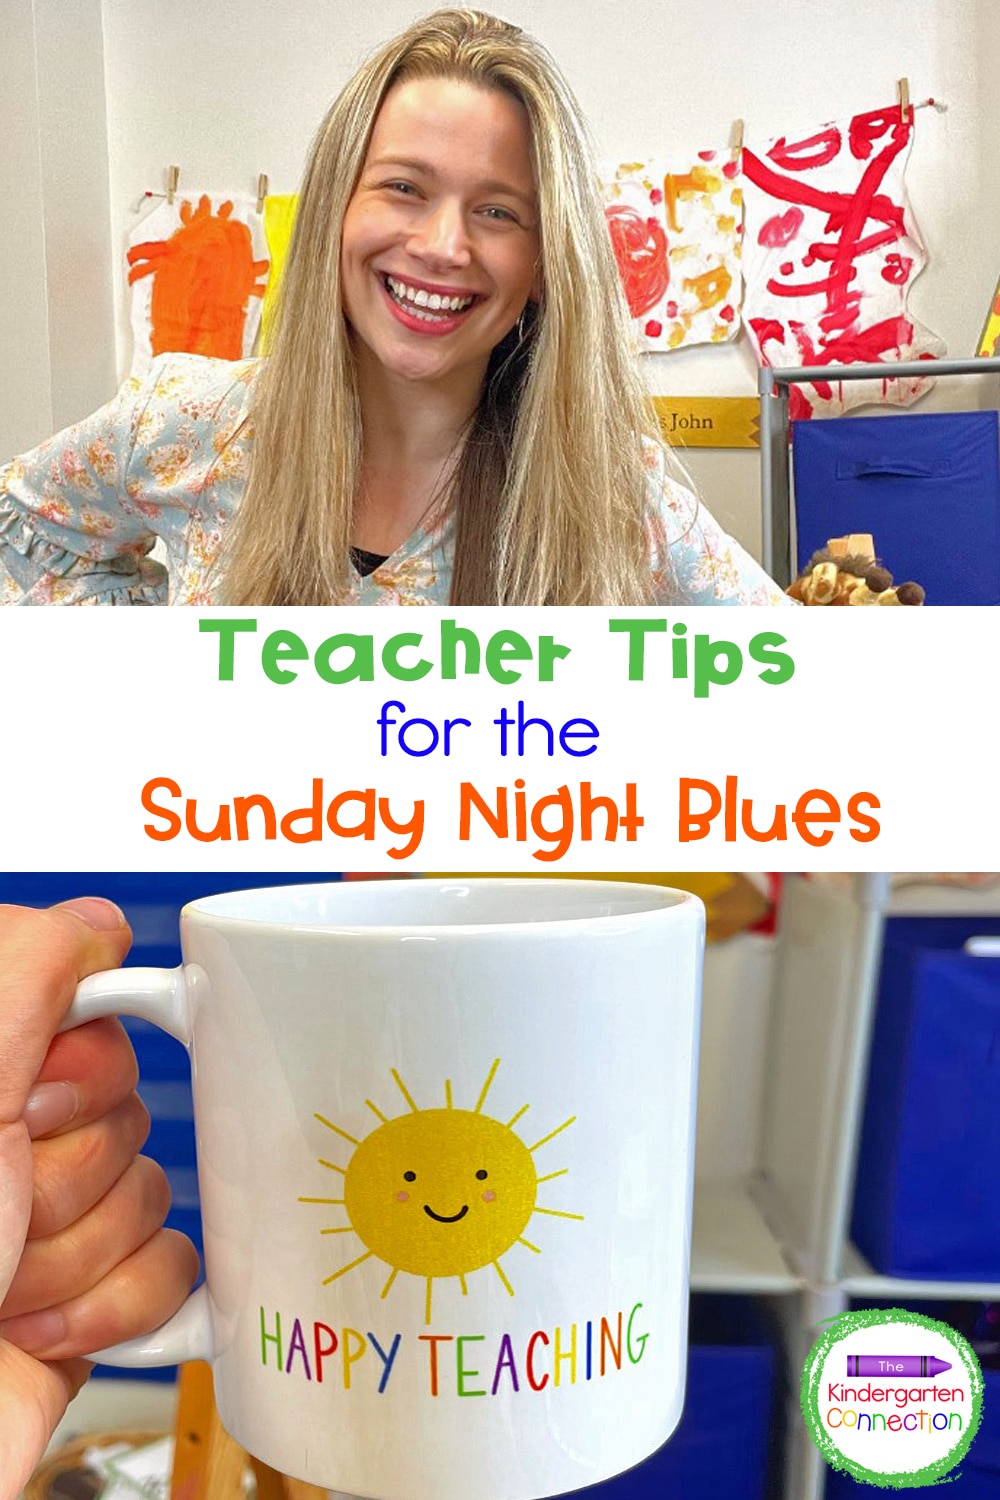 Feeling like the weekend flies by way too fast? Here are my top 3 teacher tips to help you dive into Monday and beat the Sunday Night Blues!